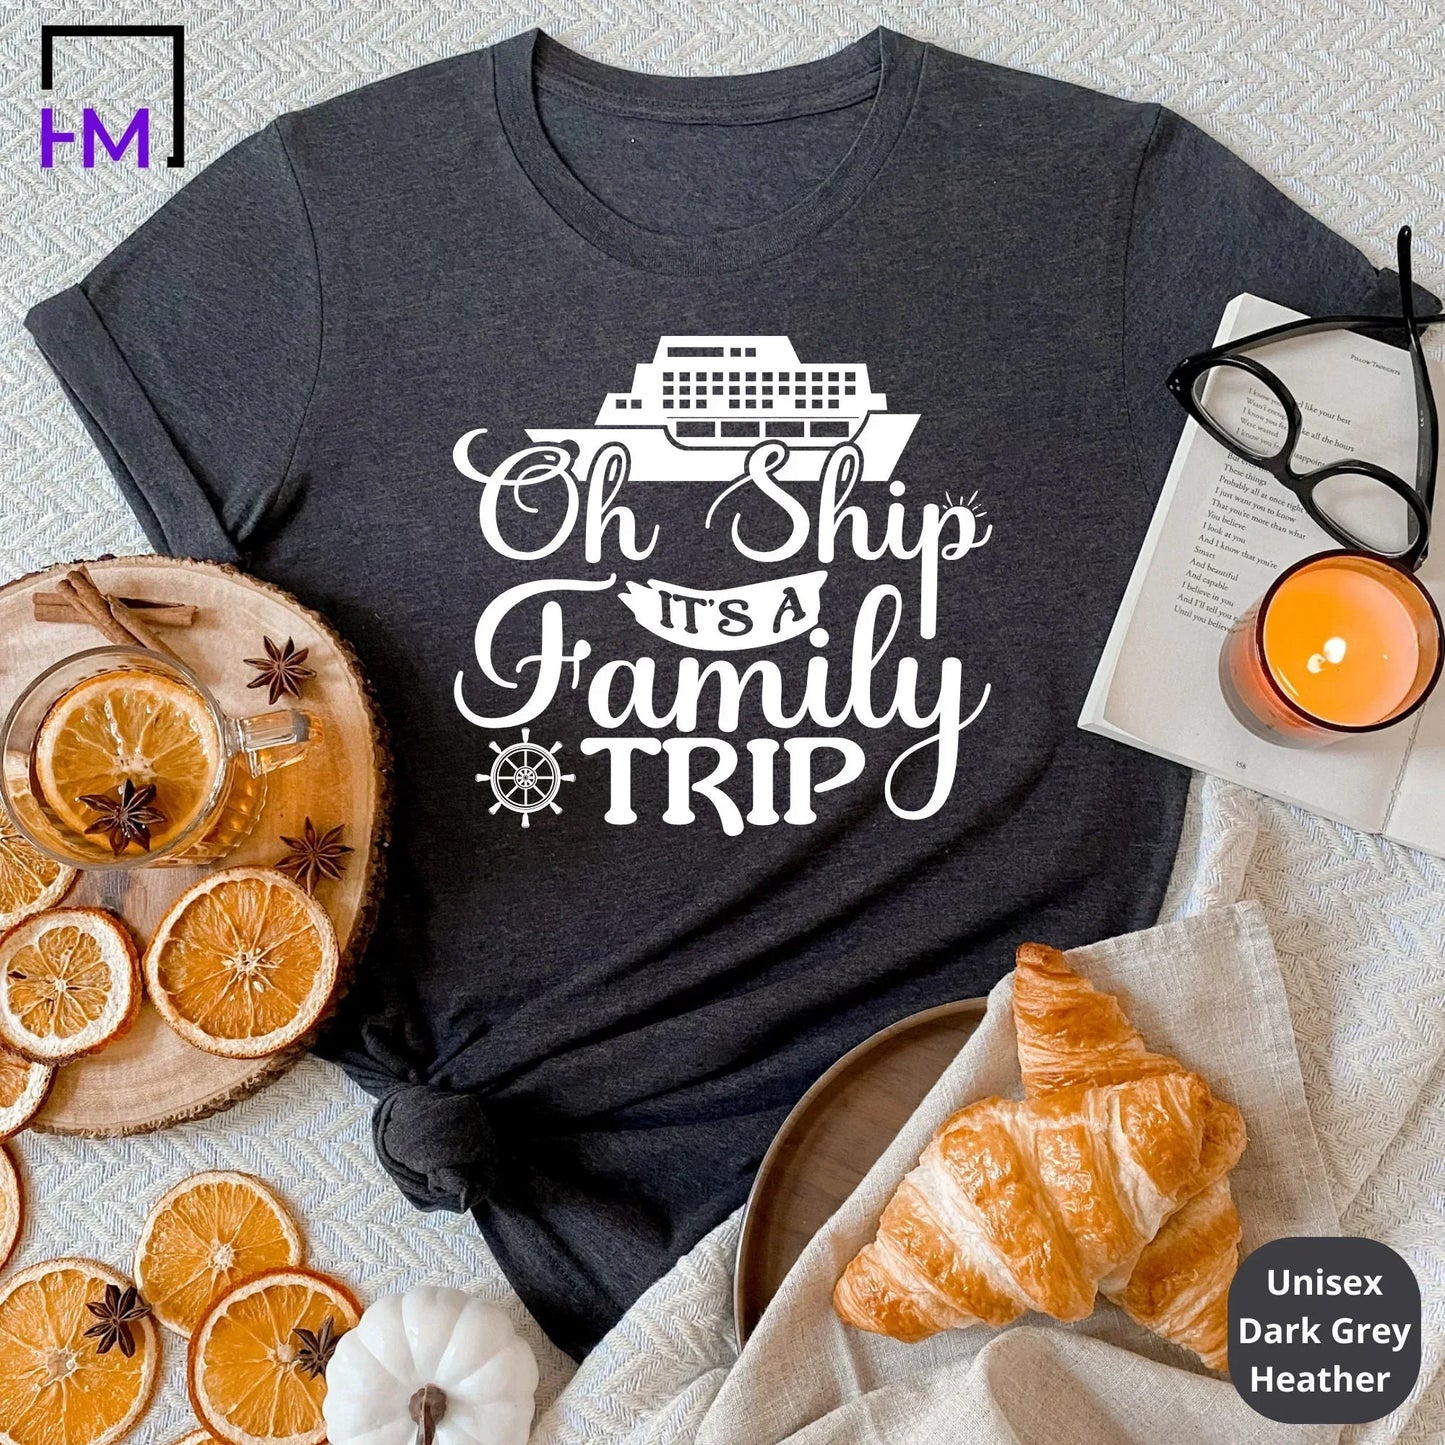 Family Cruise Shirts for Reunions